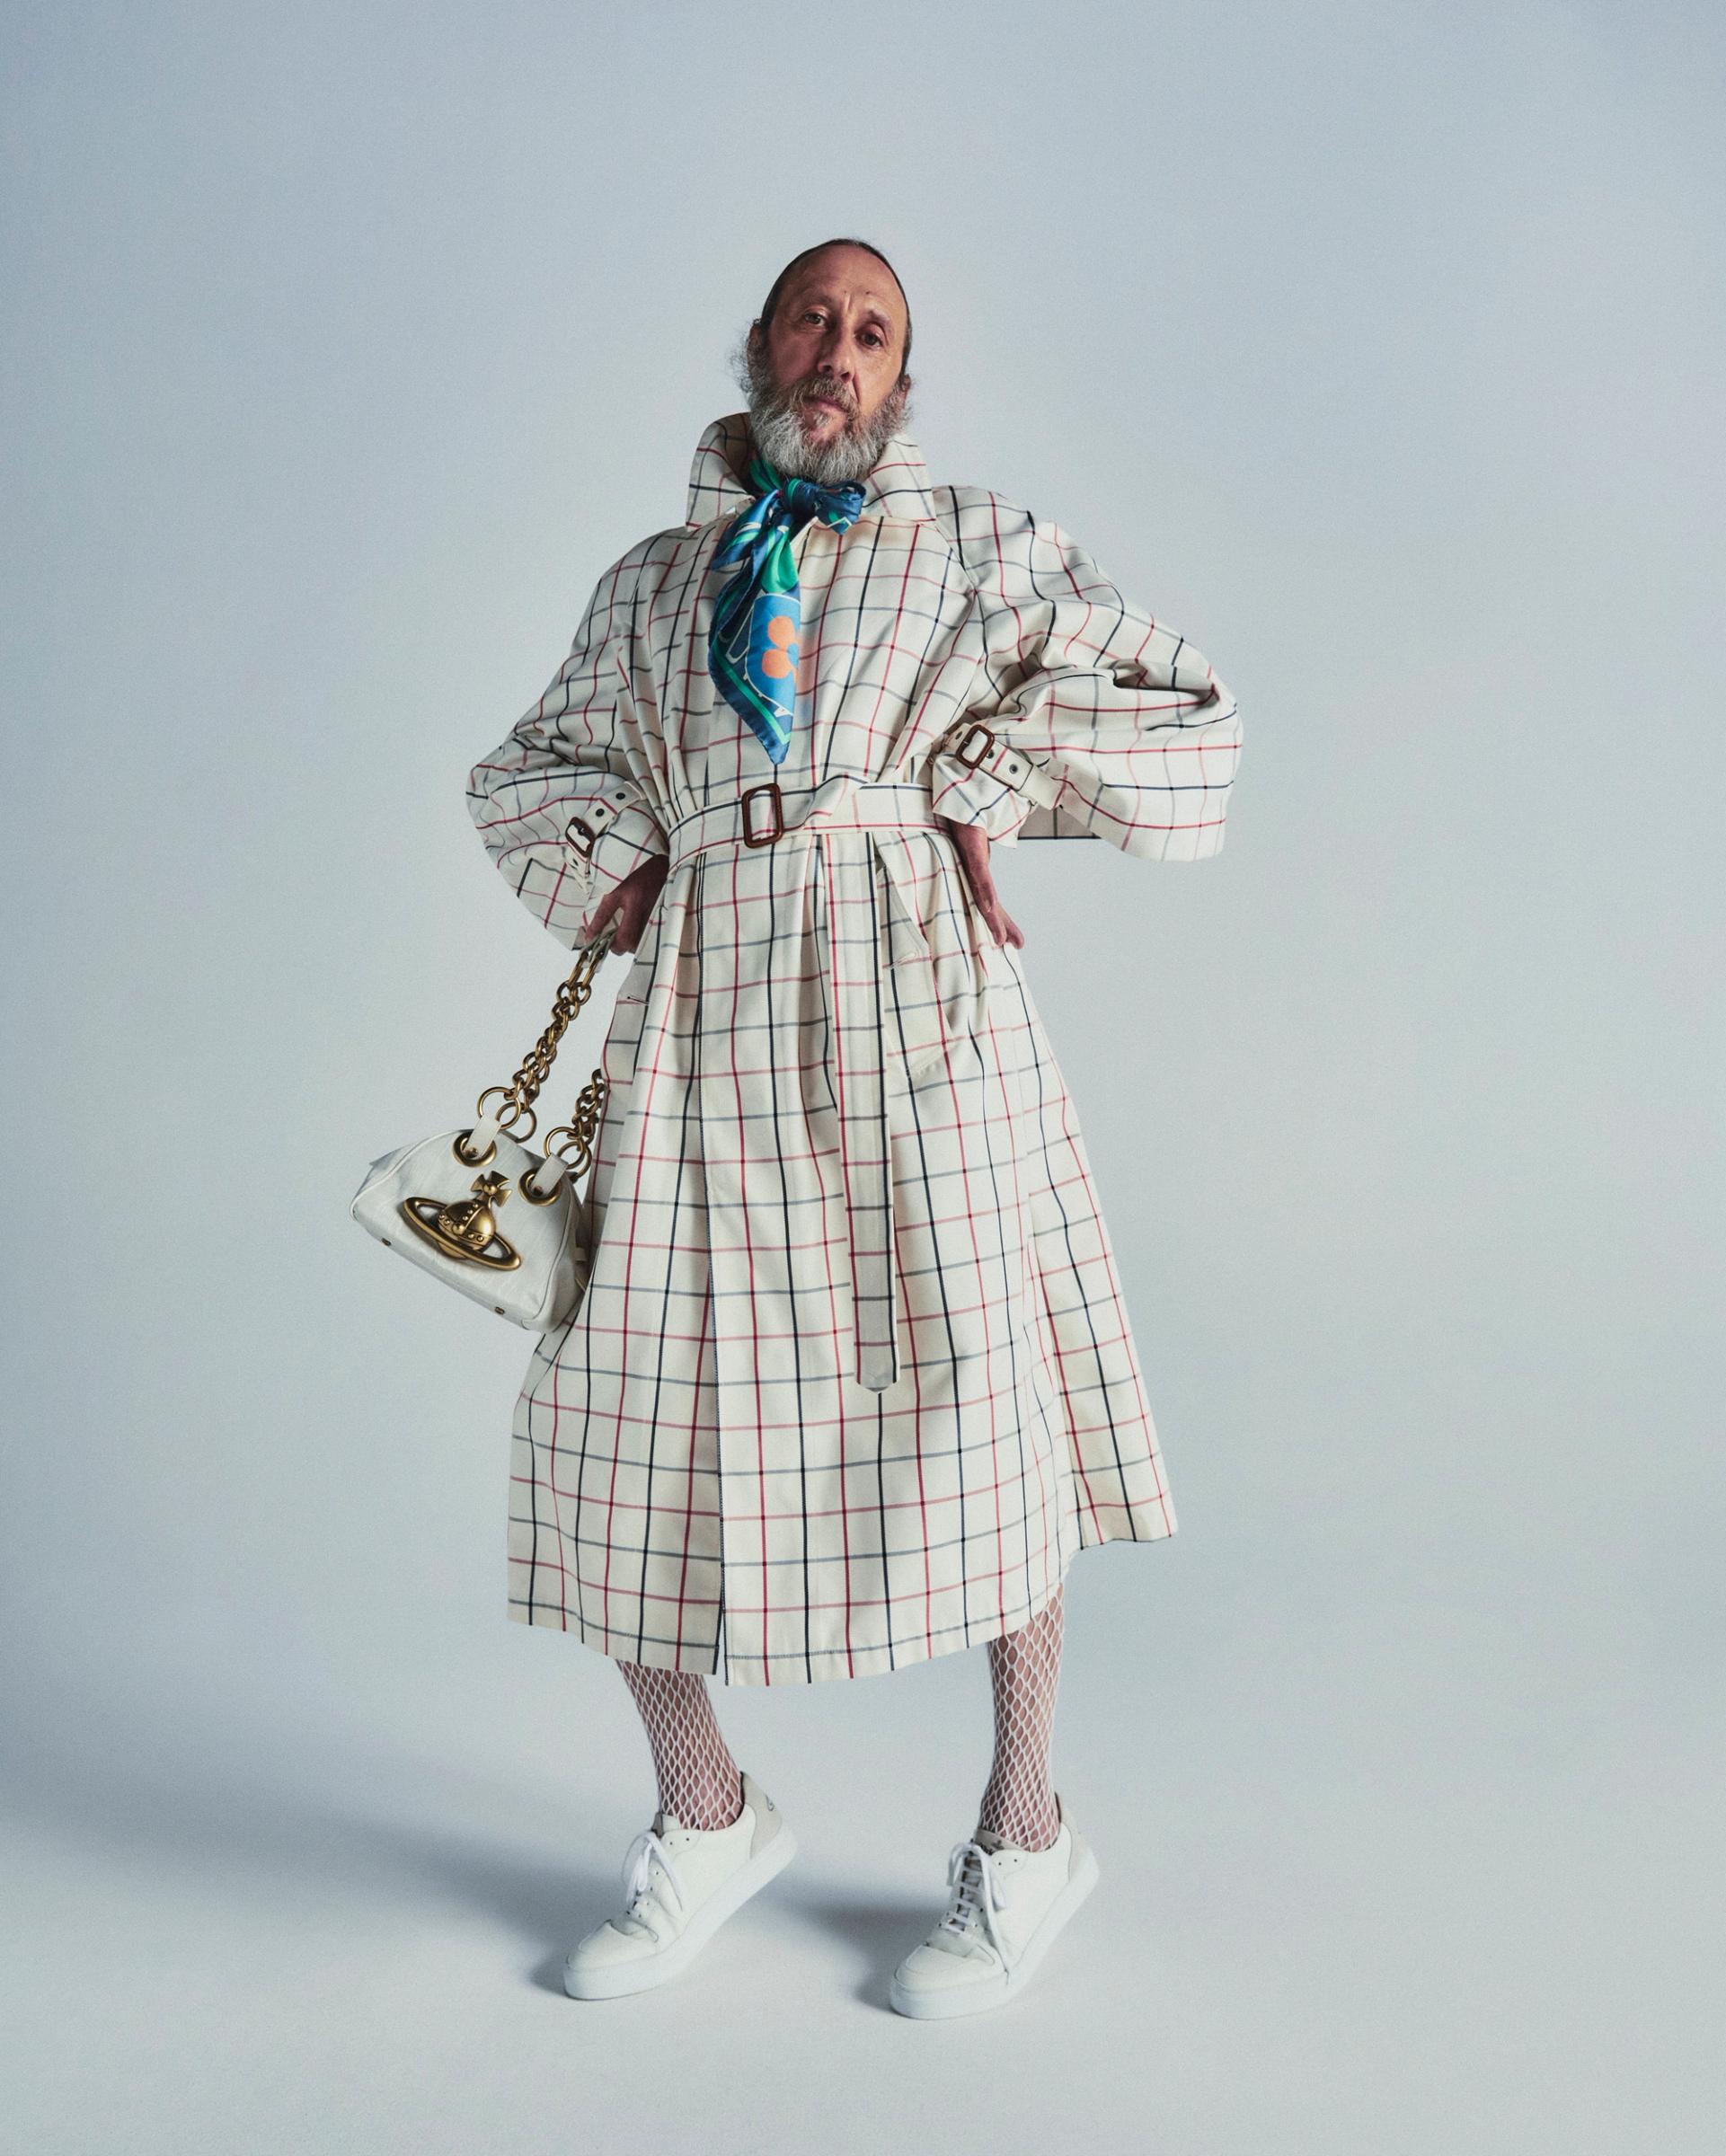 Vivienne Westwood S/S 24 - Paolo Colaiocco styled by Sabina Schreder